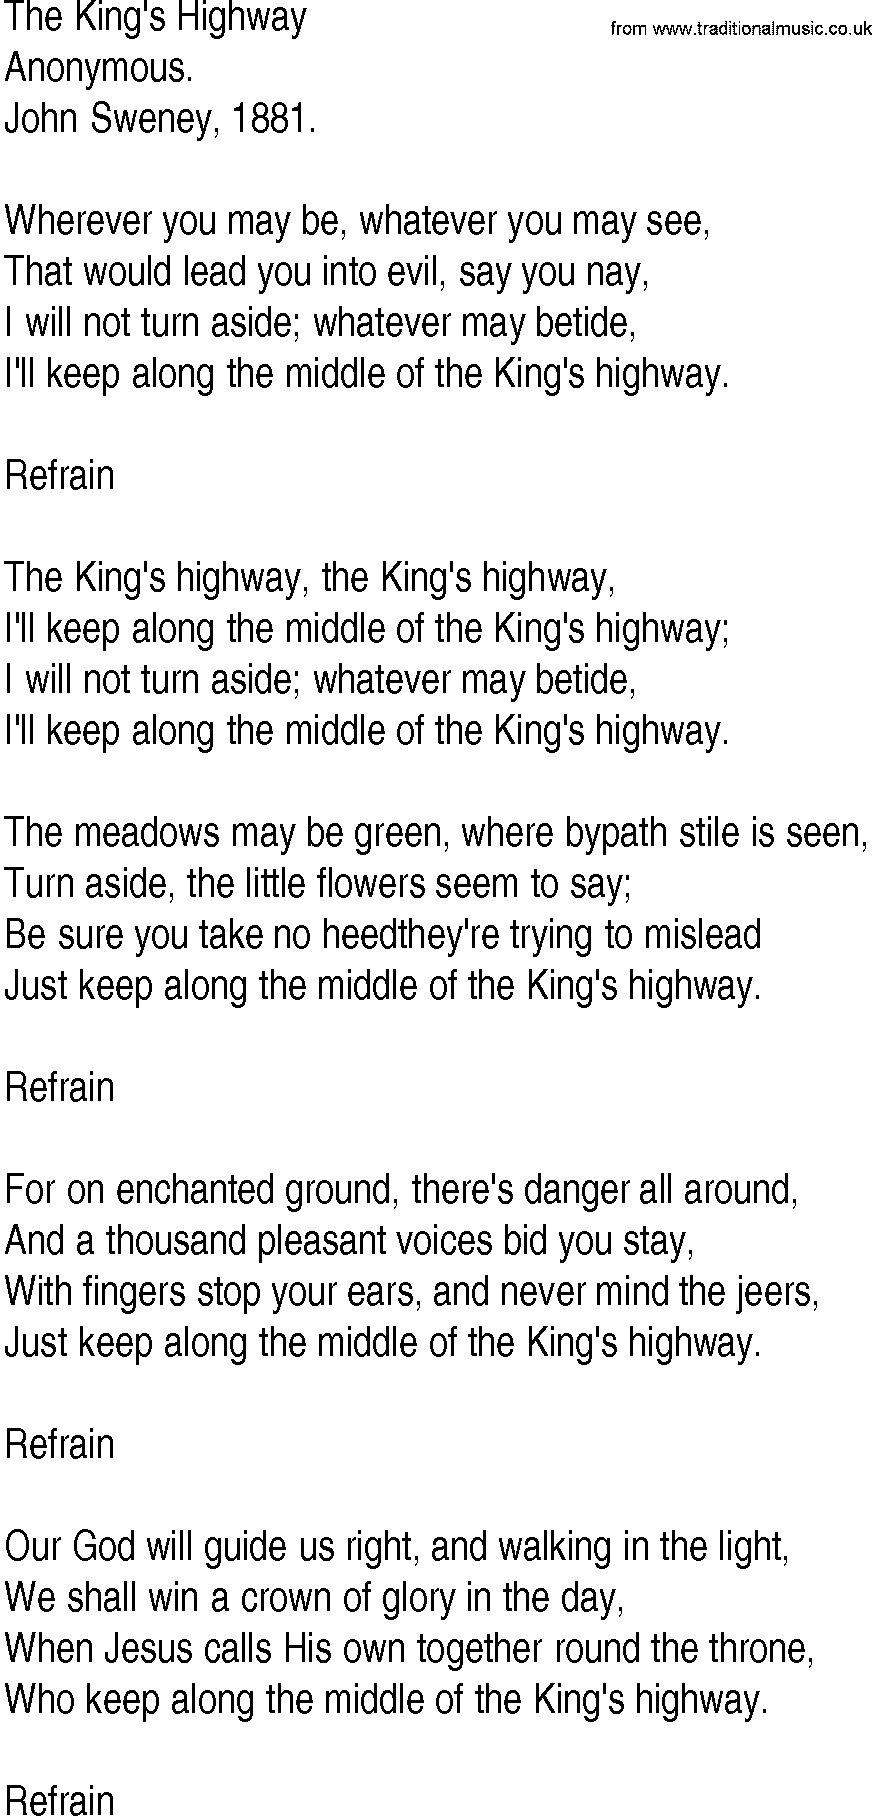 Hymn and Gospel Song: The King's Highway by Anonymous lyrics